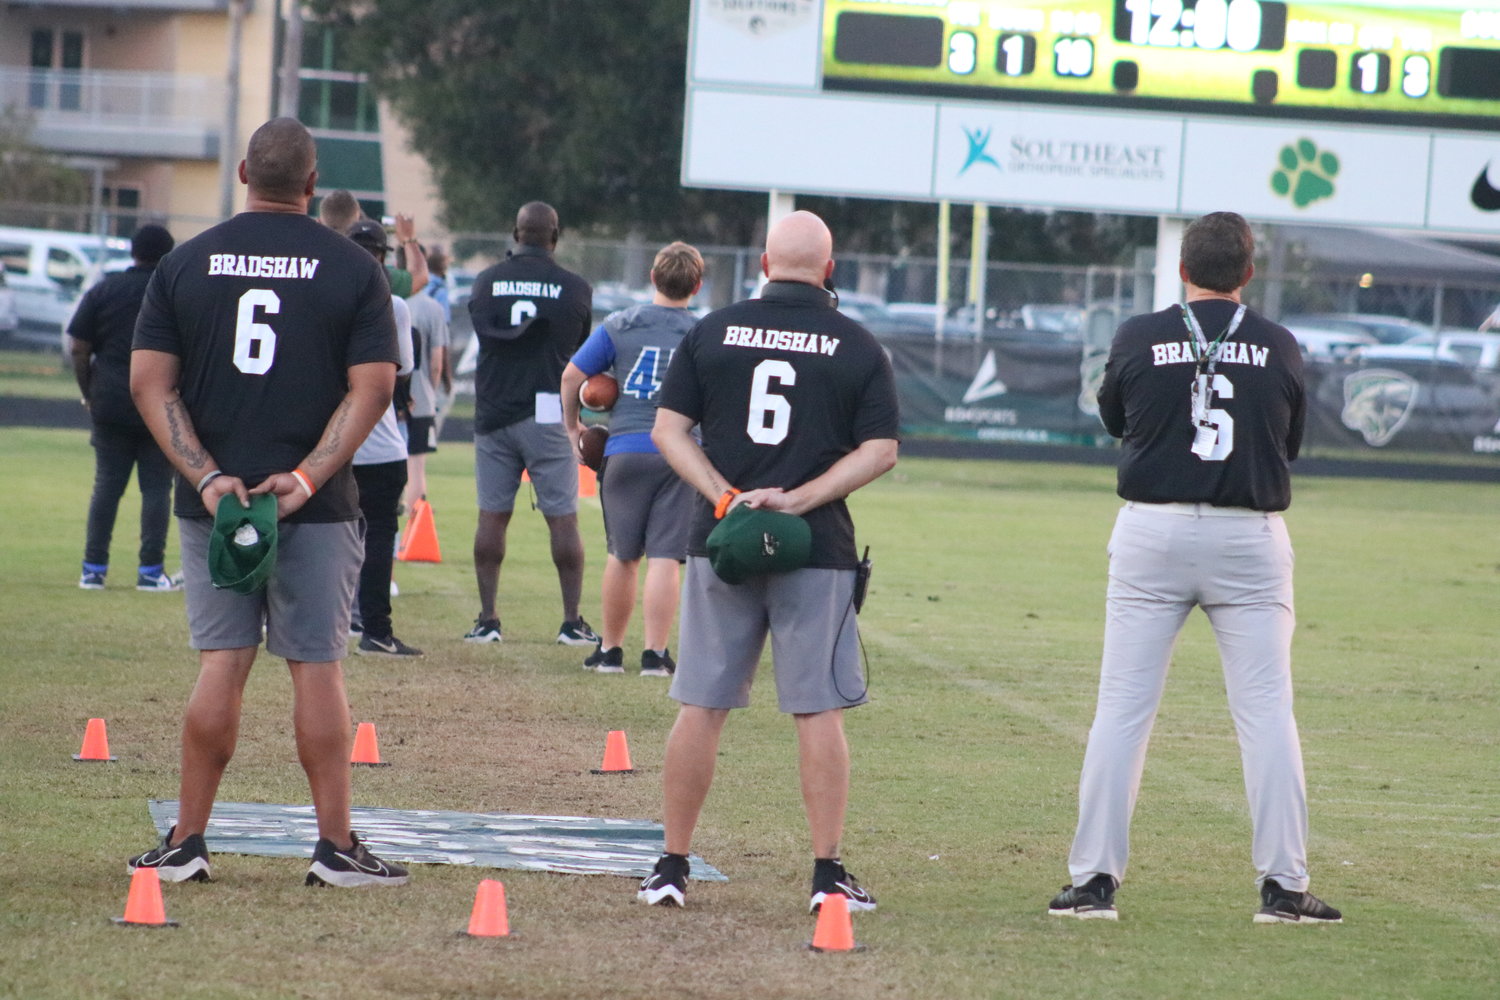 Nease coaches wore shirts to honor former player Joe Bradshaw, who passed away in March.